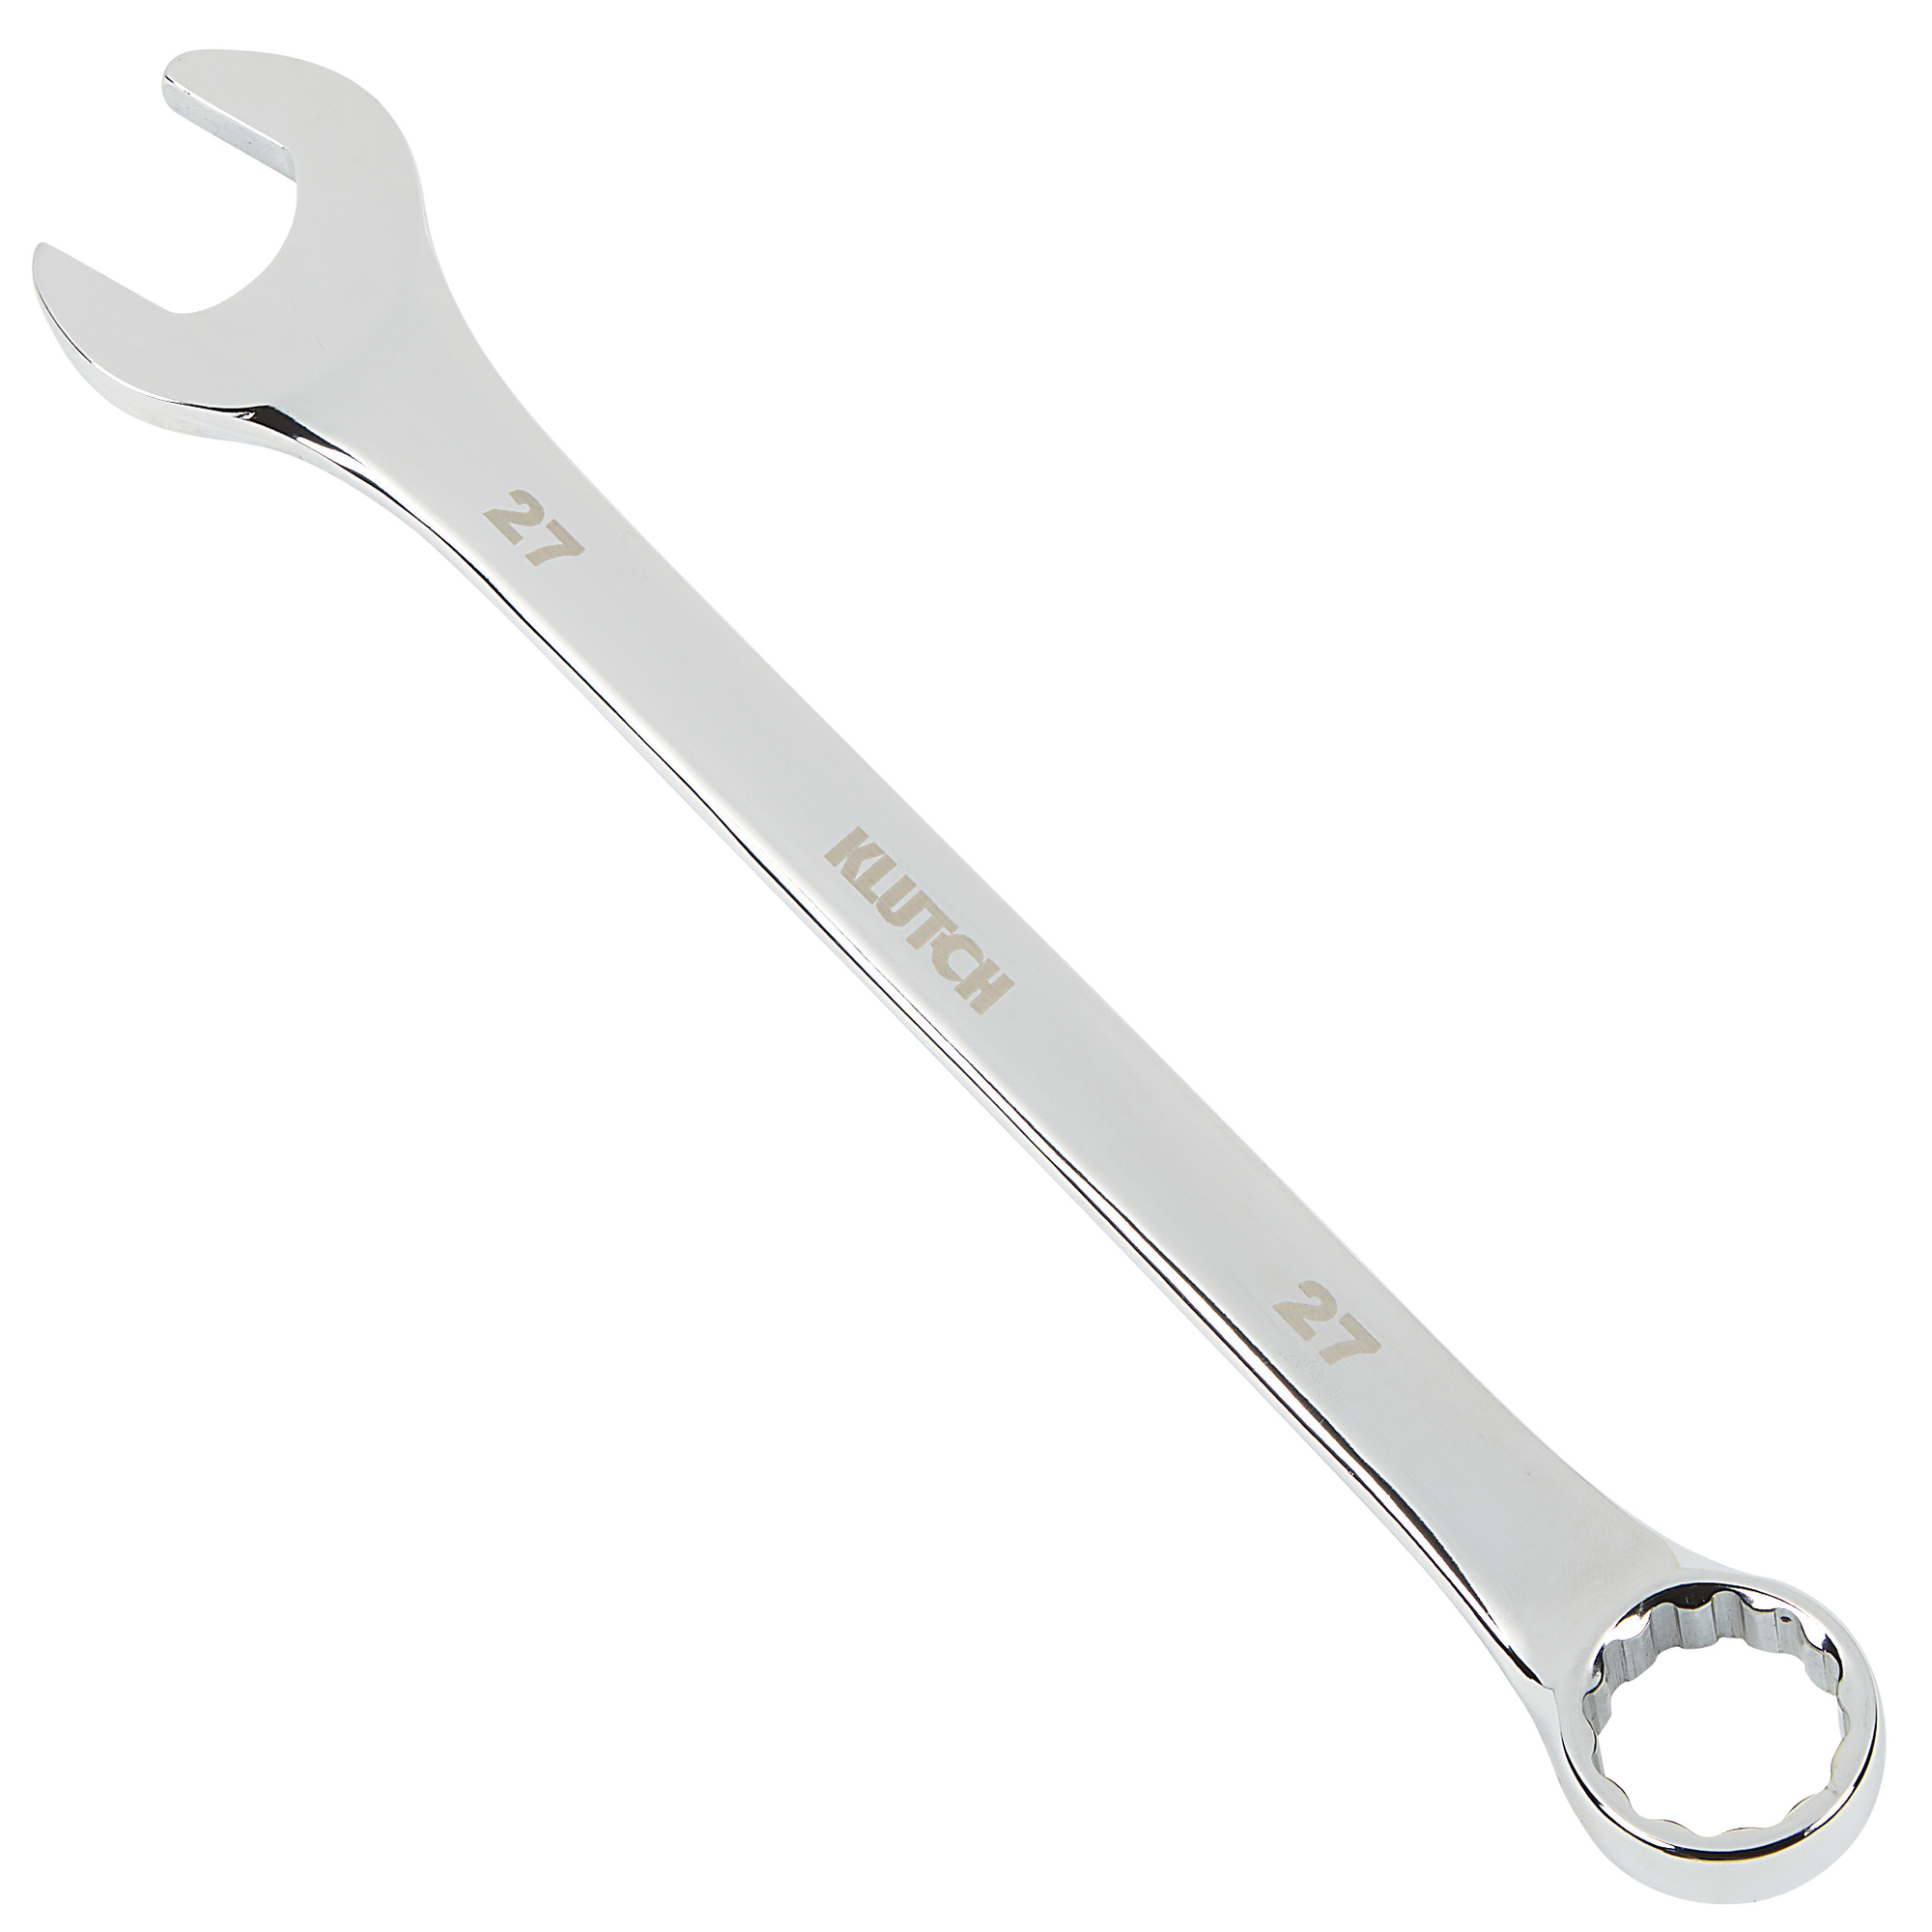 Klutch Metric Combination Wrench, 27mm x 11.81Inch, Model E-2004